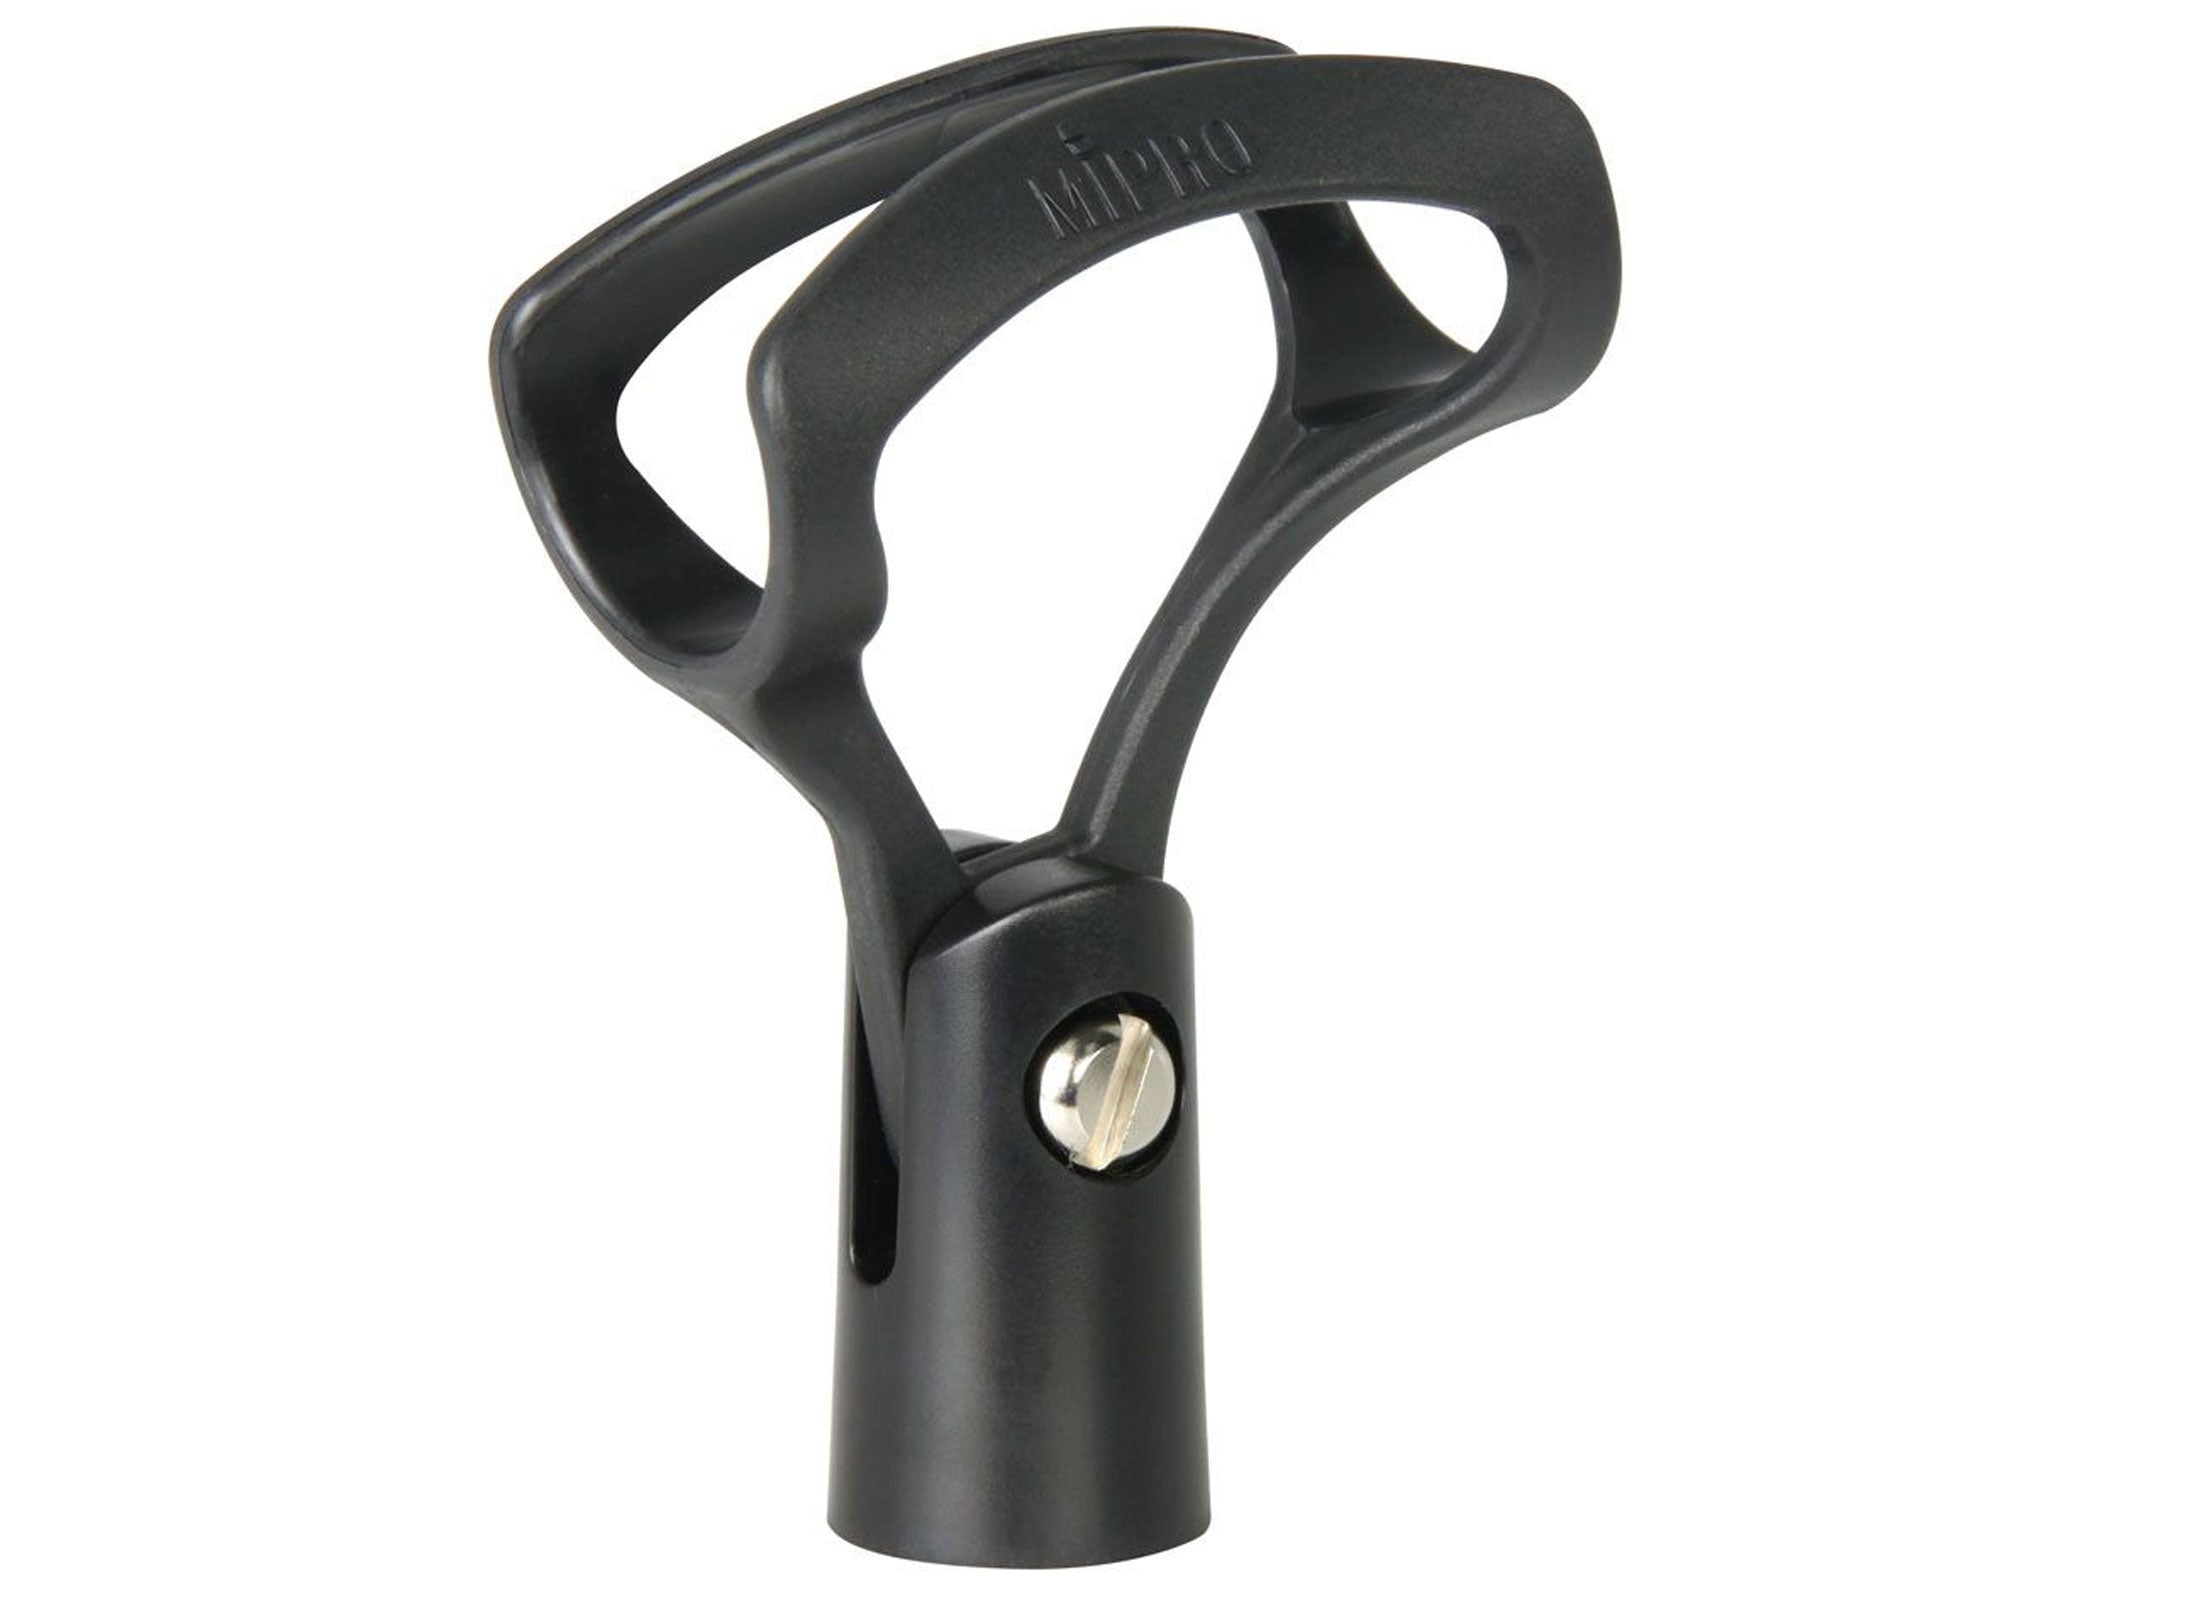 Mipro MD-20 microphone clamp